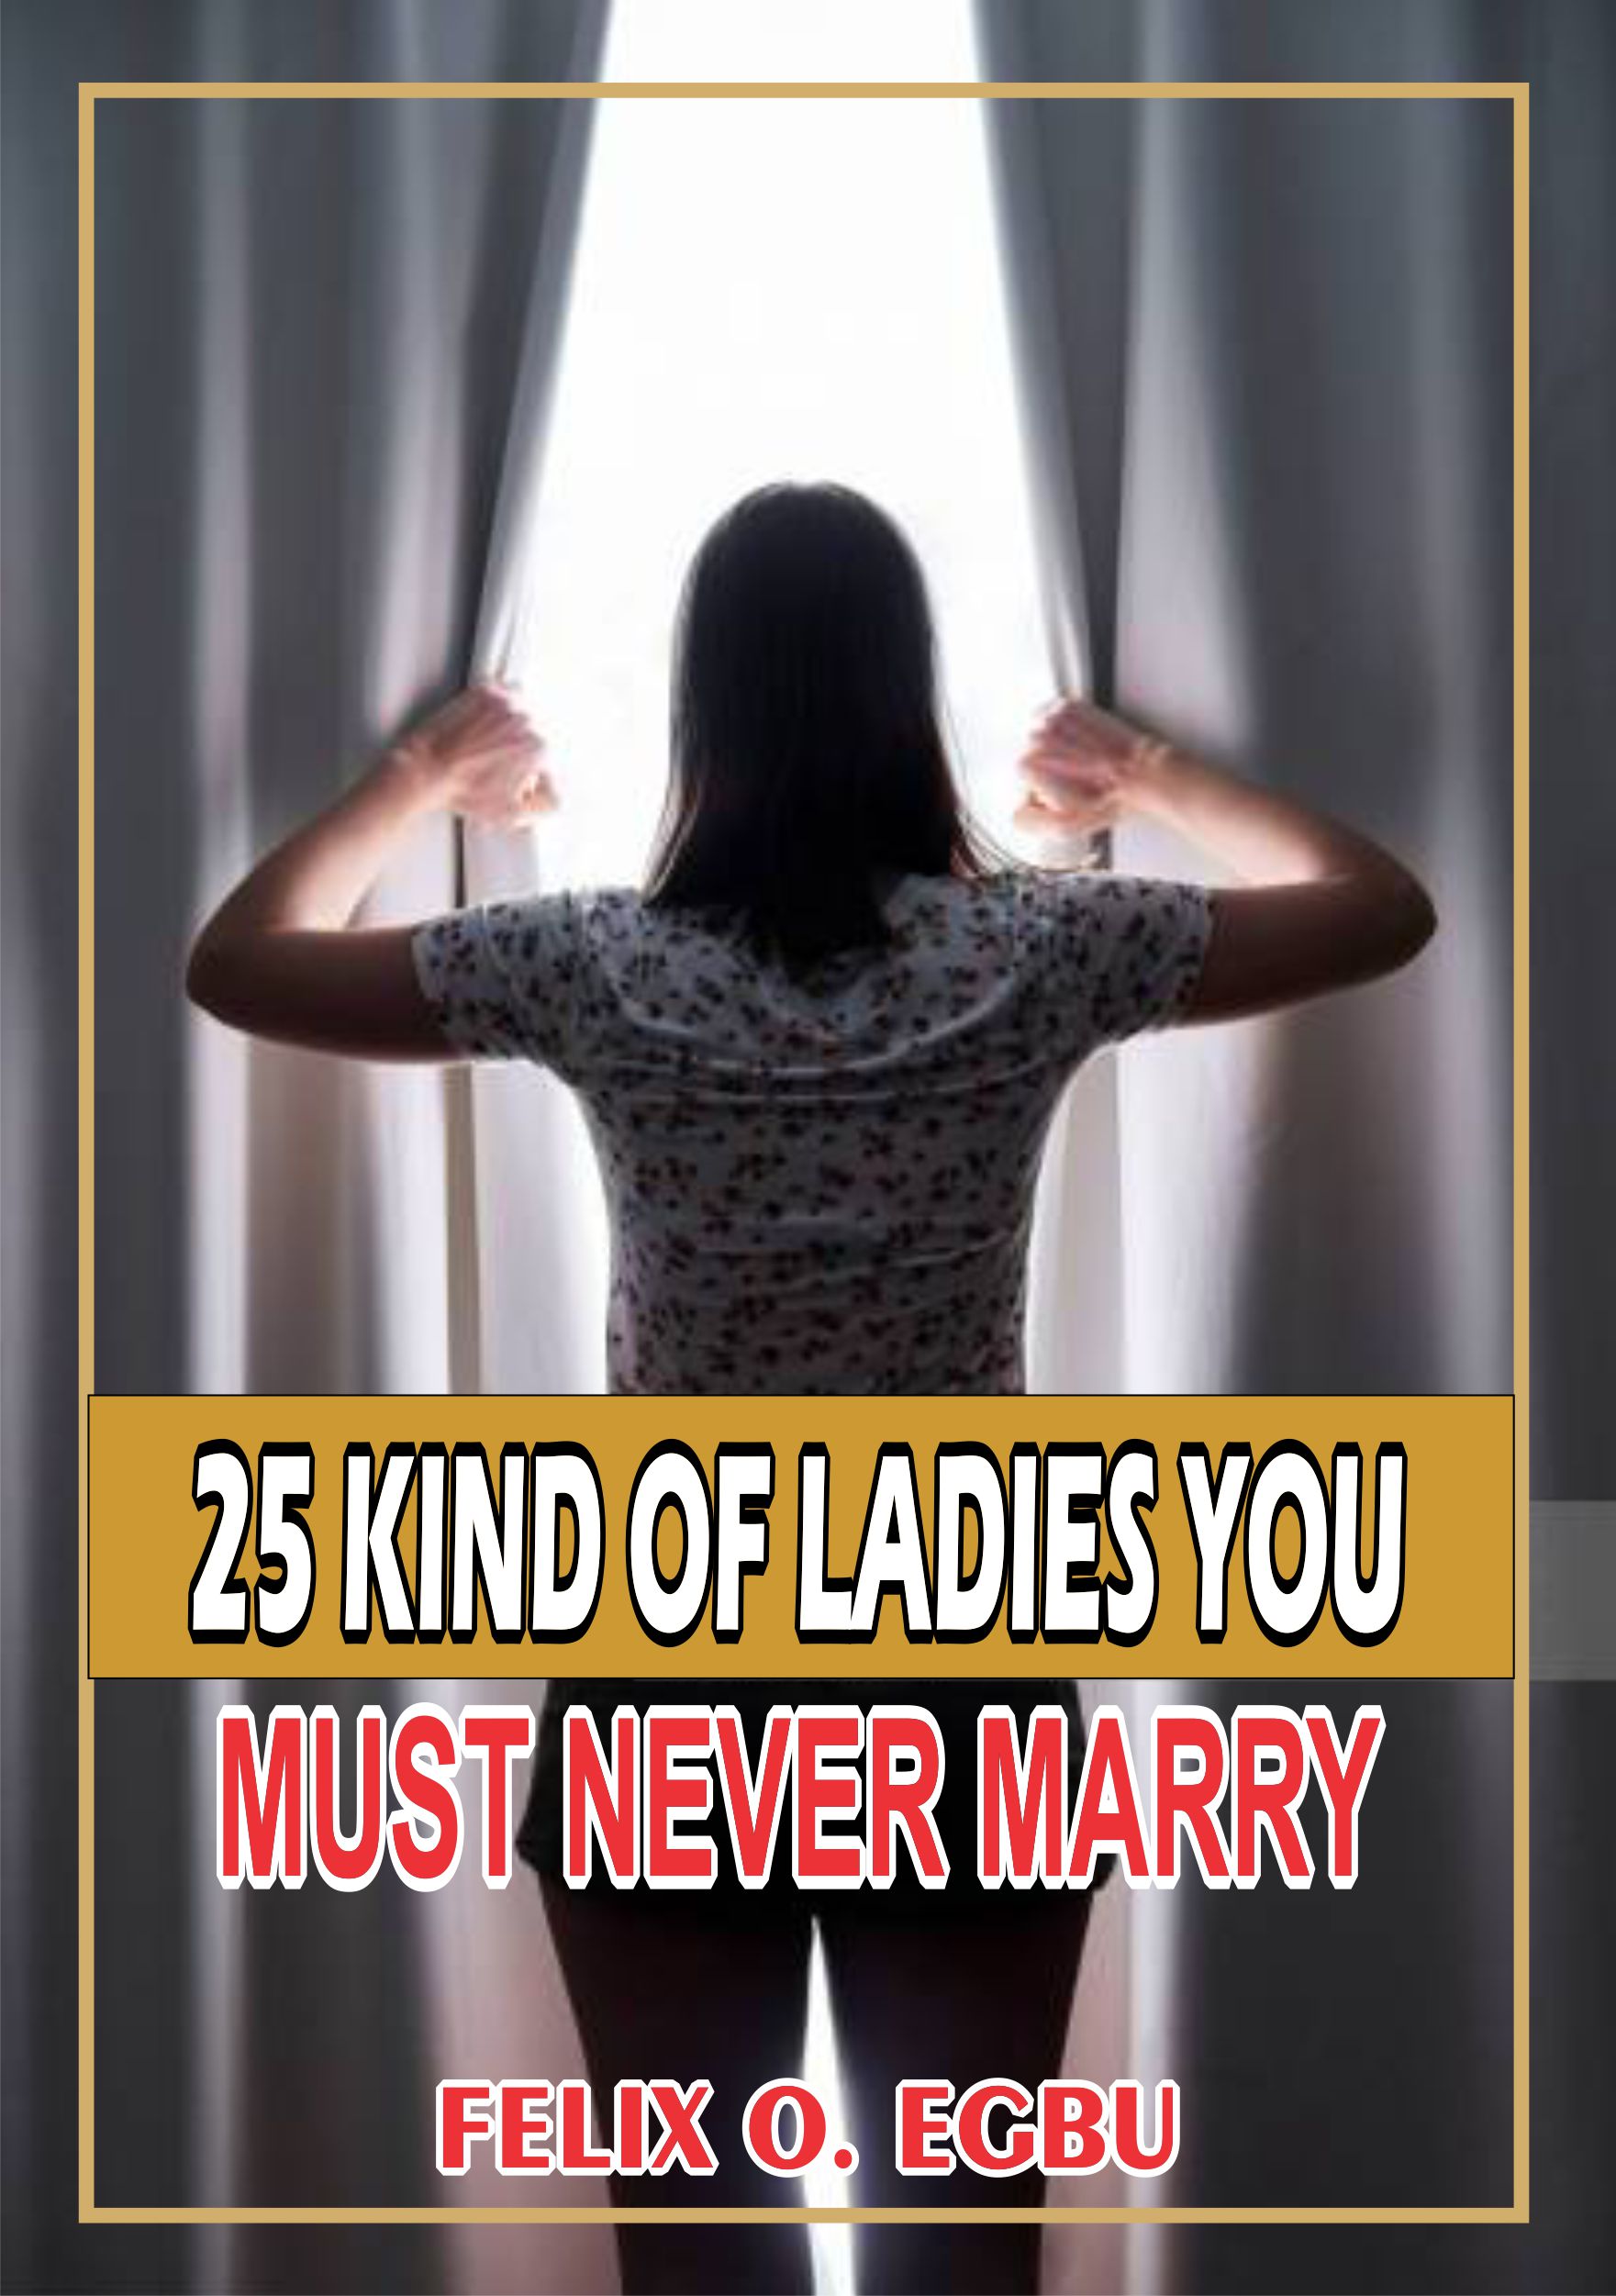 25-Kind-of-Ladies-You-Must-Never-Marry